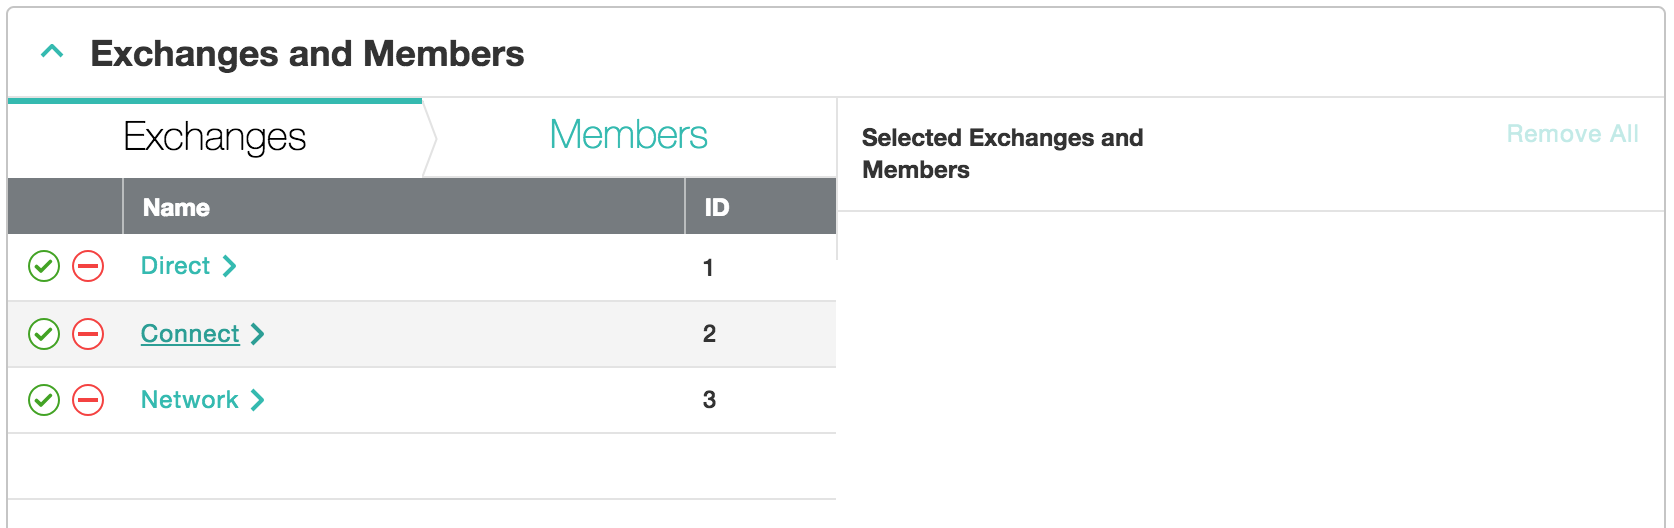 Screenshot that provides information about an exchange and its members.